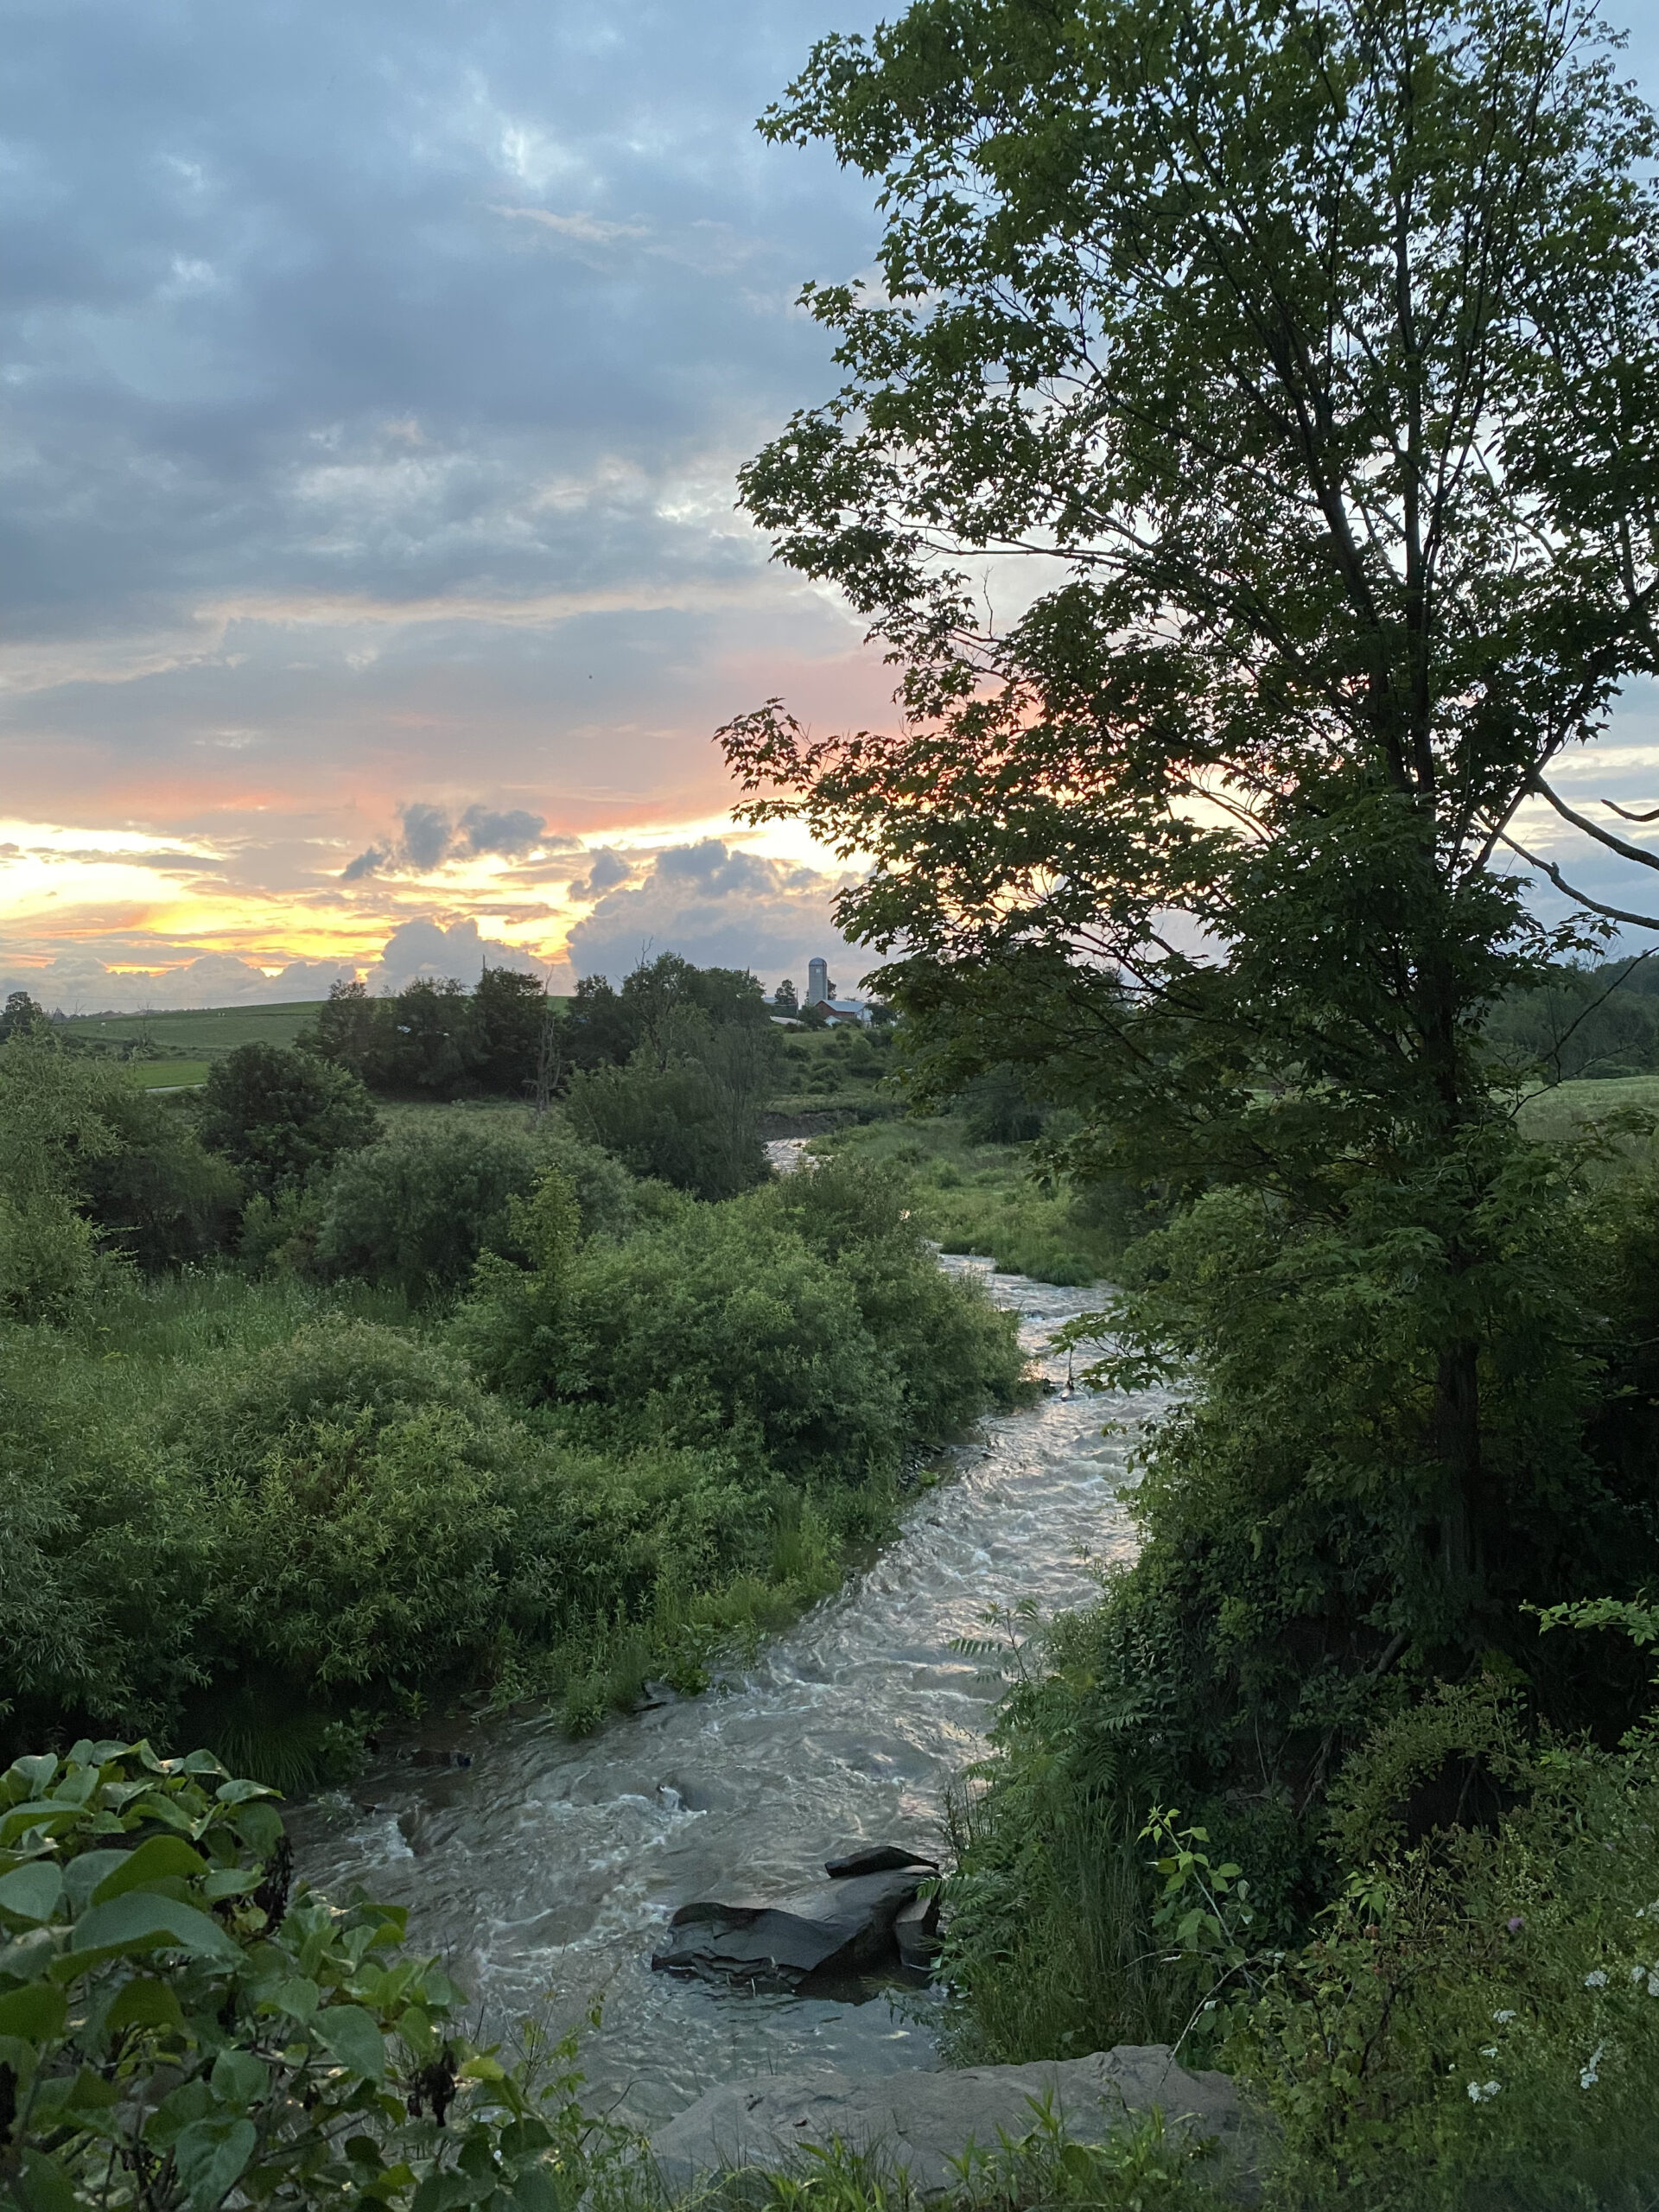 beautiful country scene with creek and sunset